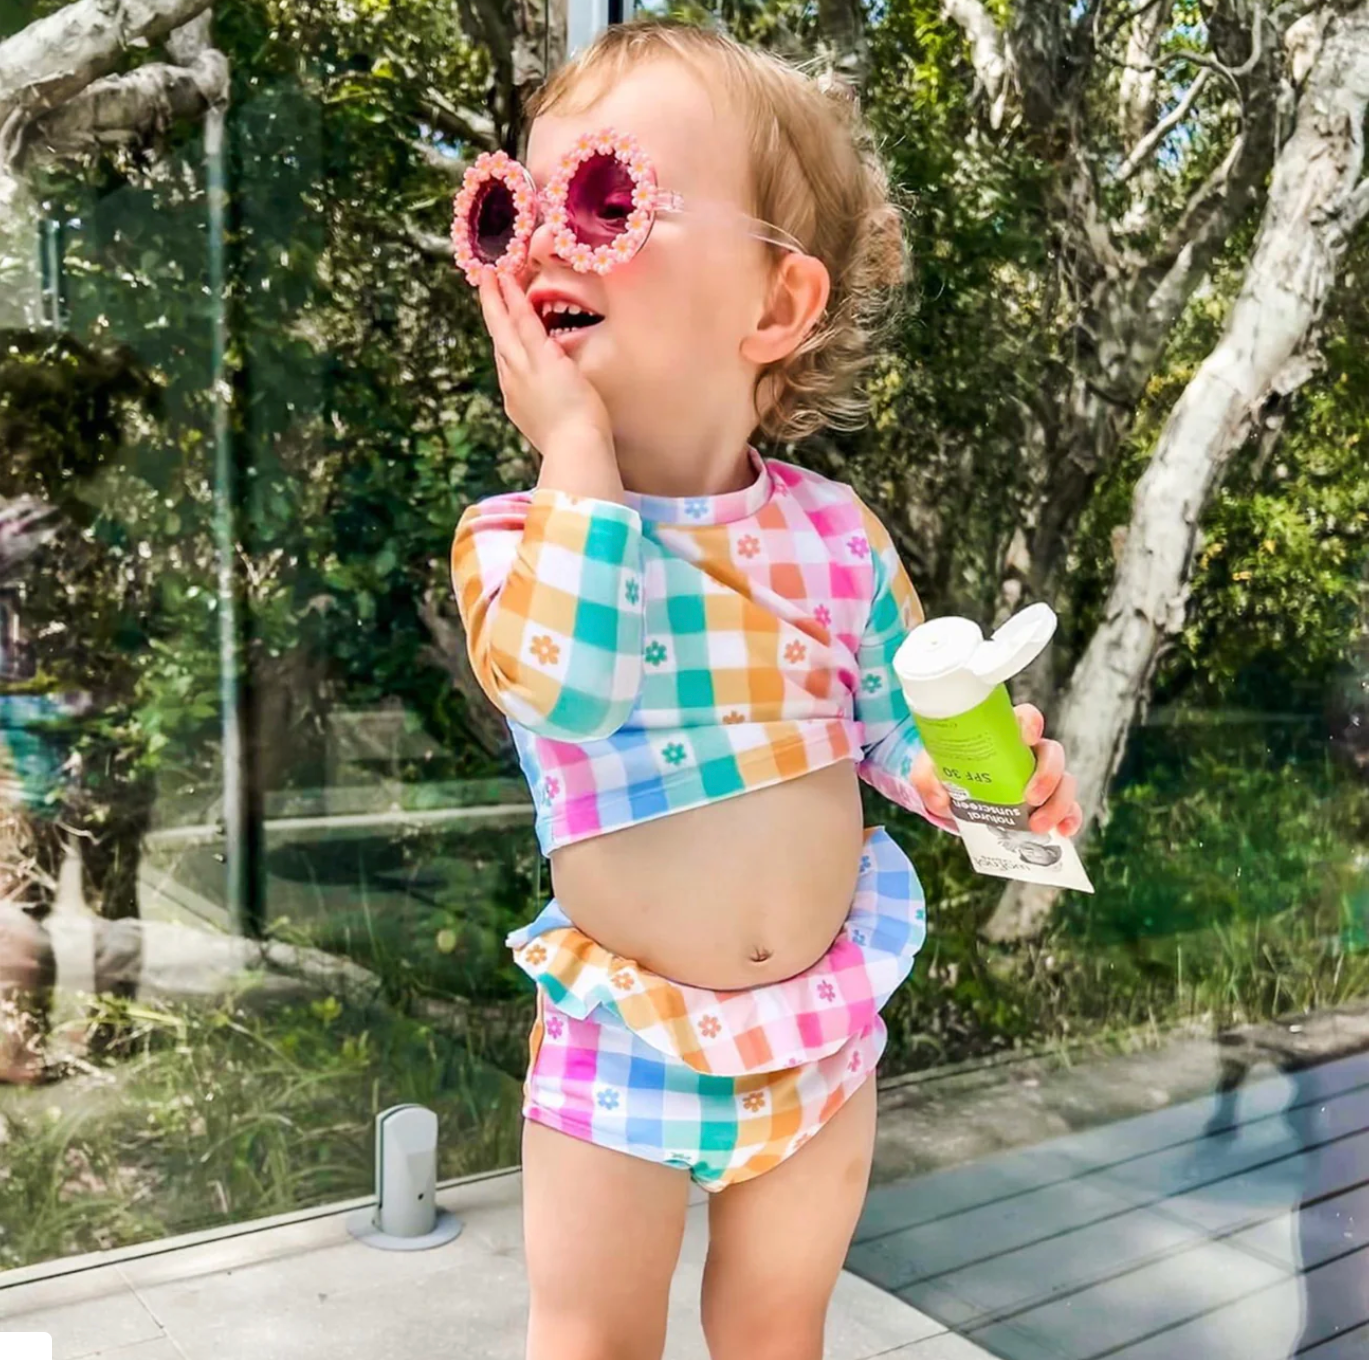 What To Look For In A Sunscreen For Your Baby